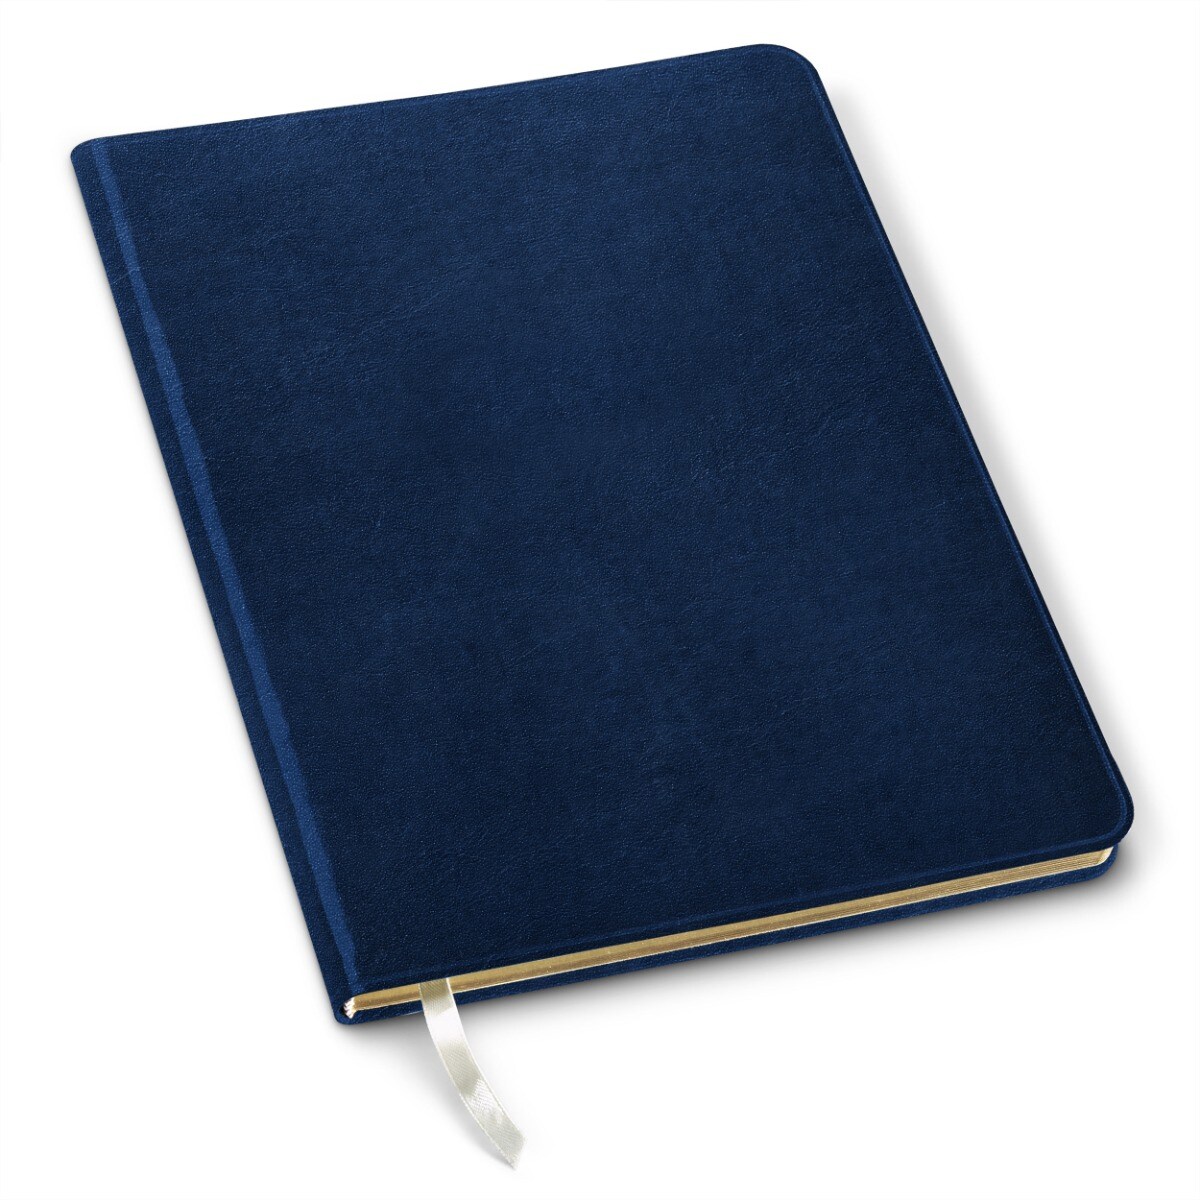 Large Blank Sketchbook by Gallery Leather - 9.75"x7.5"